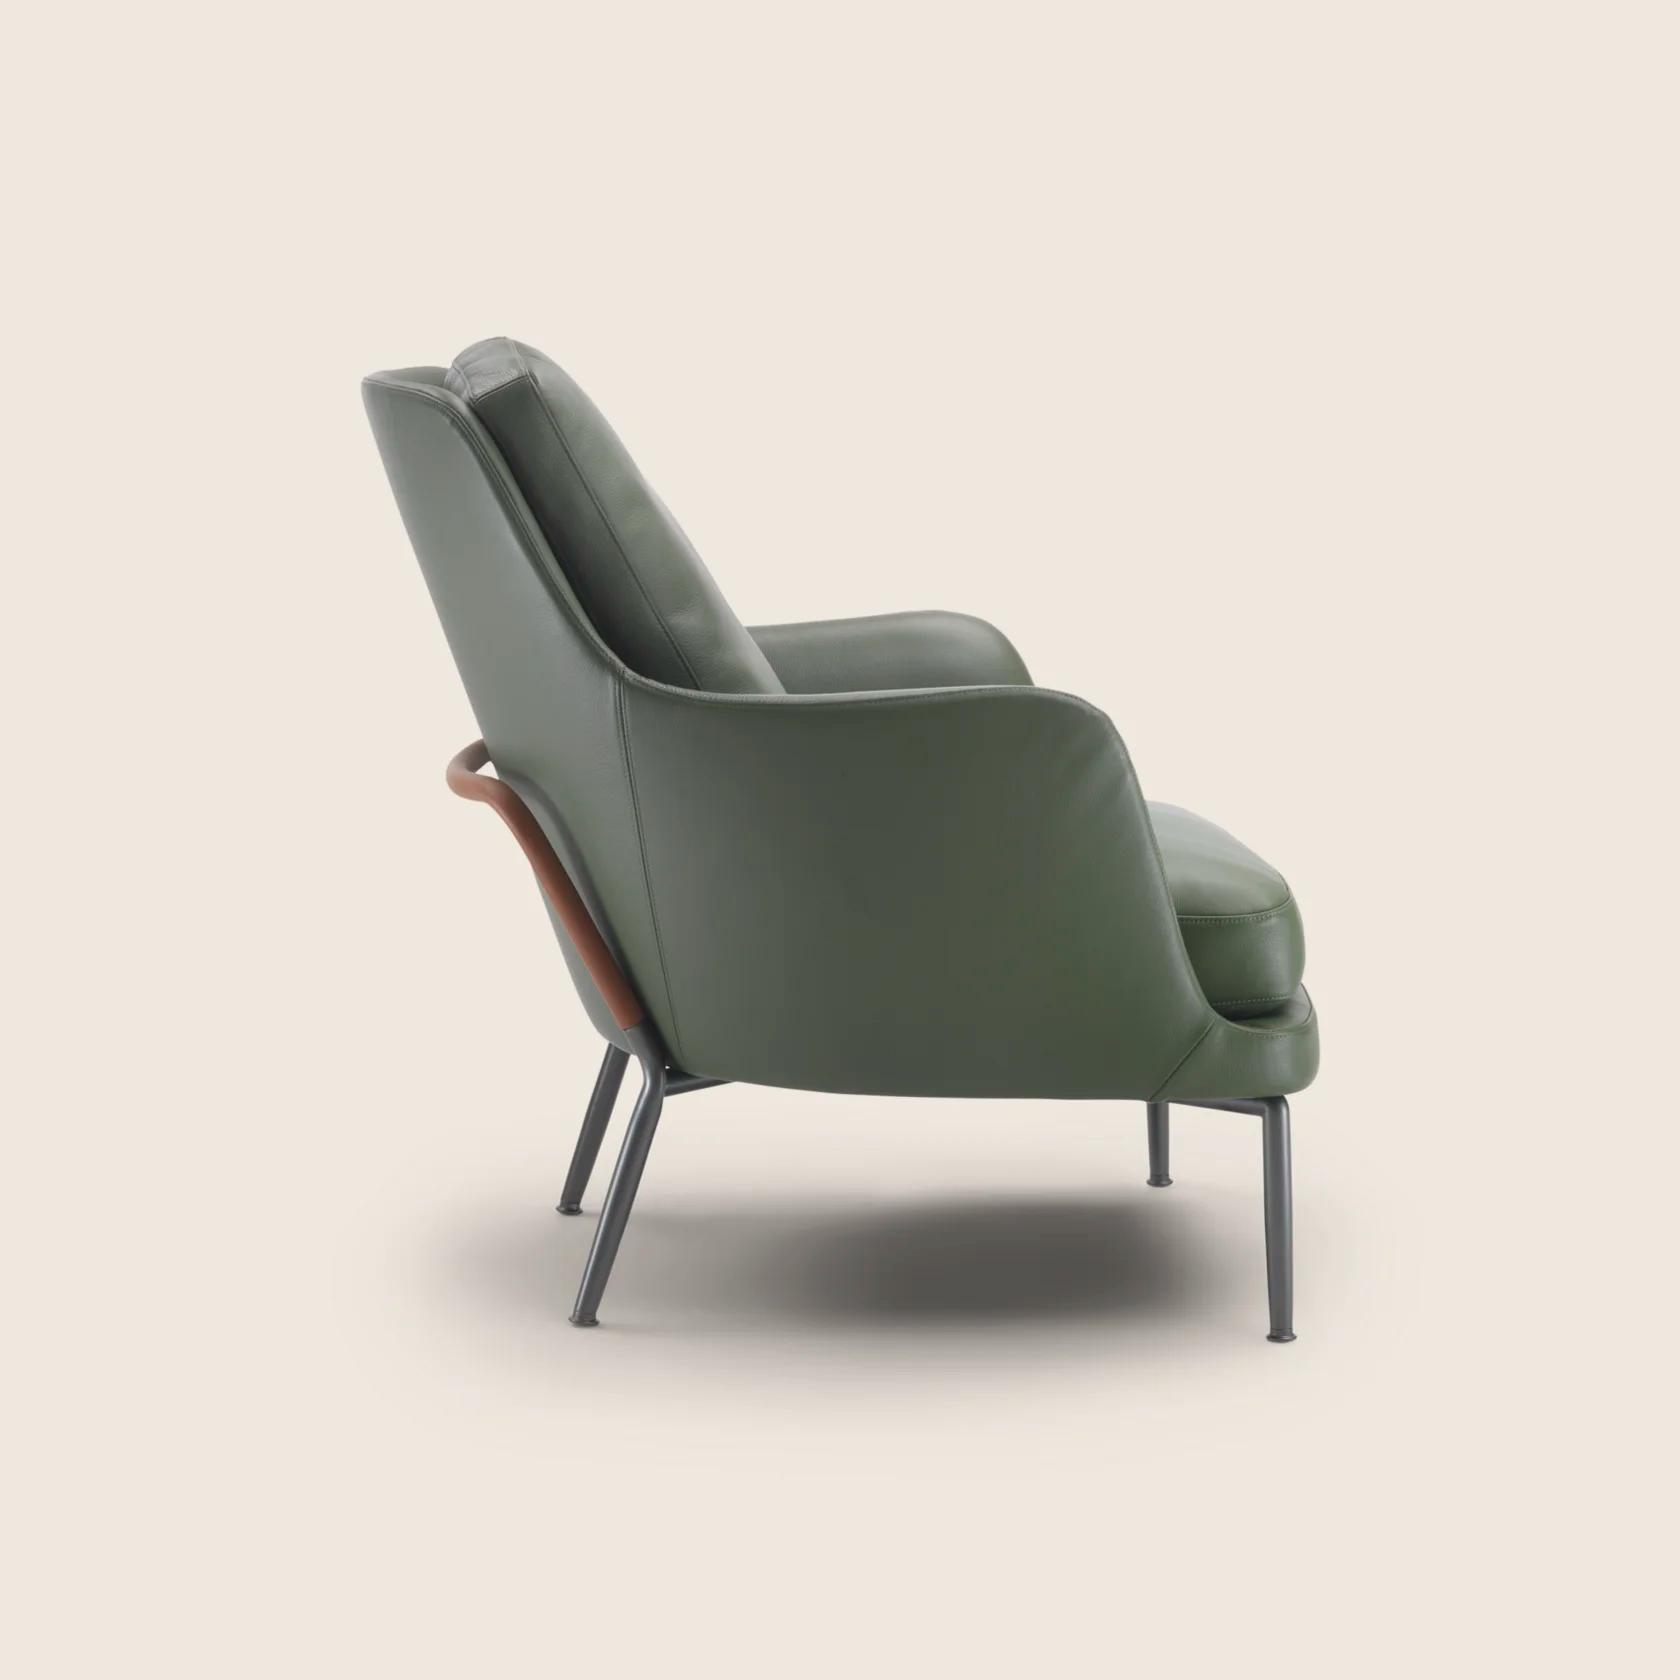 028623_MARLEY_ARMCHAIR_05.png